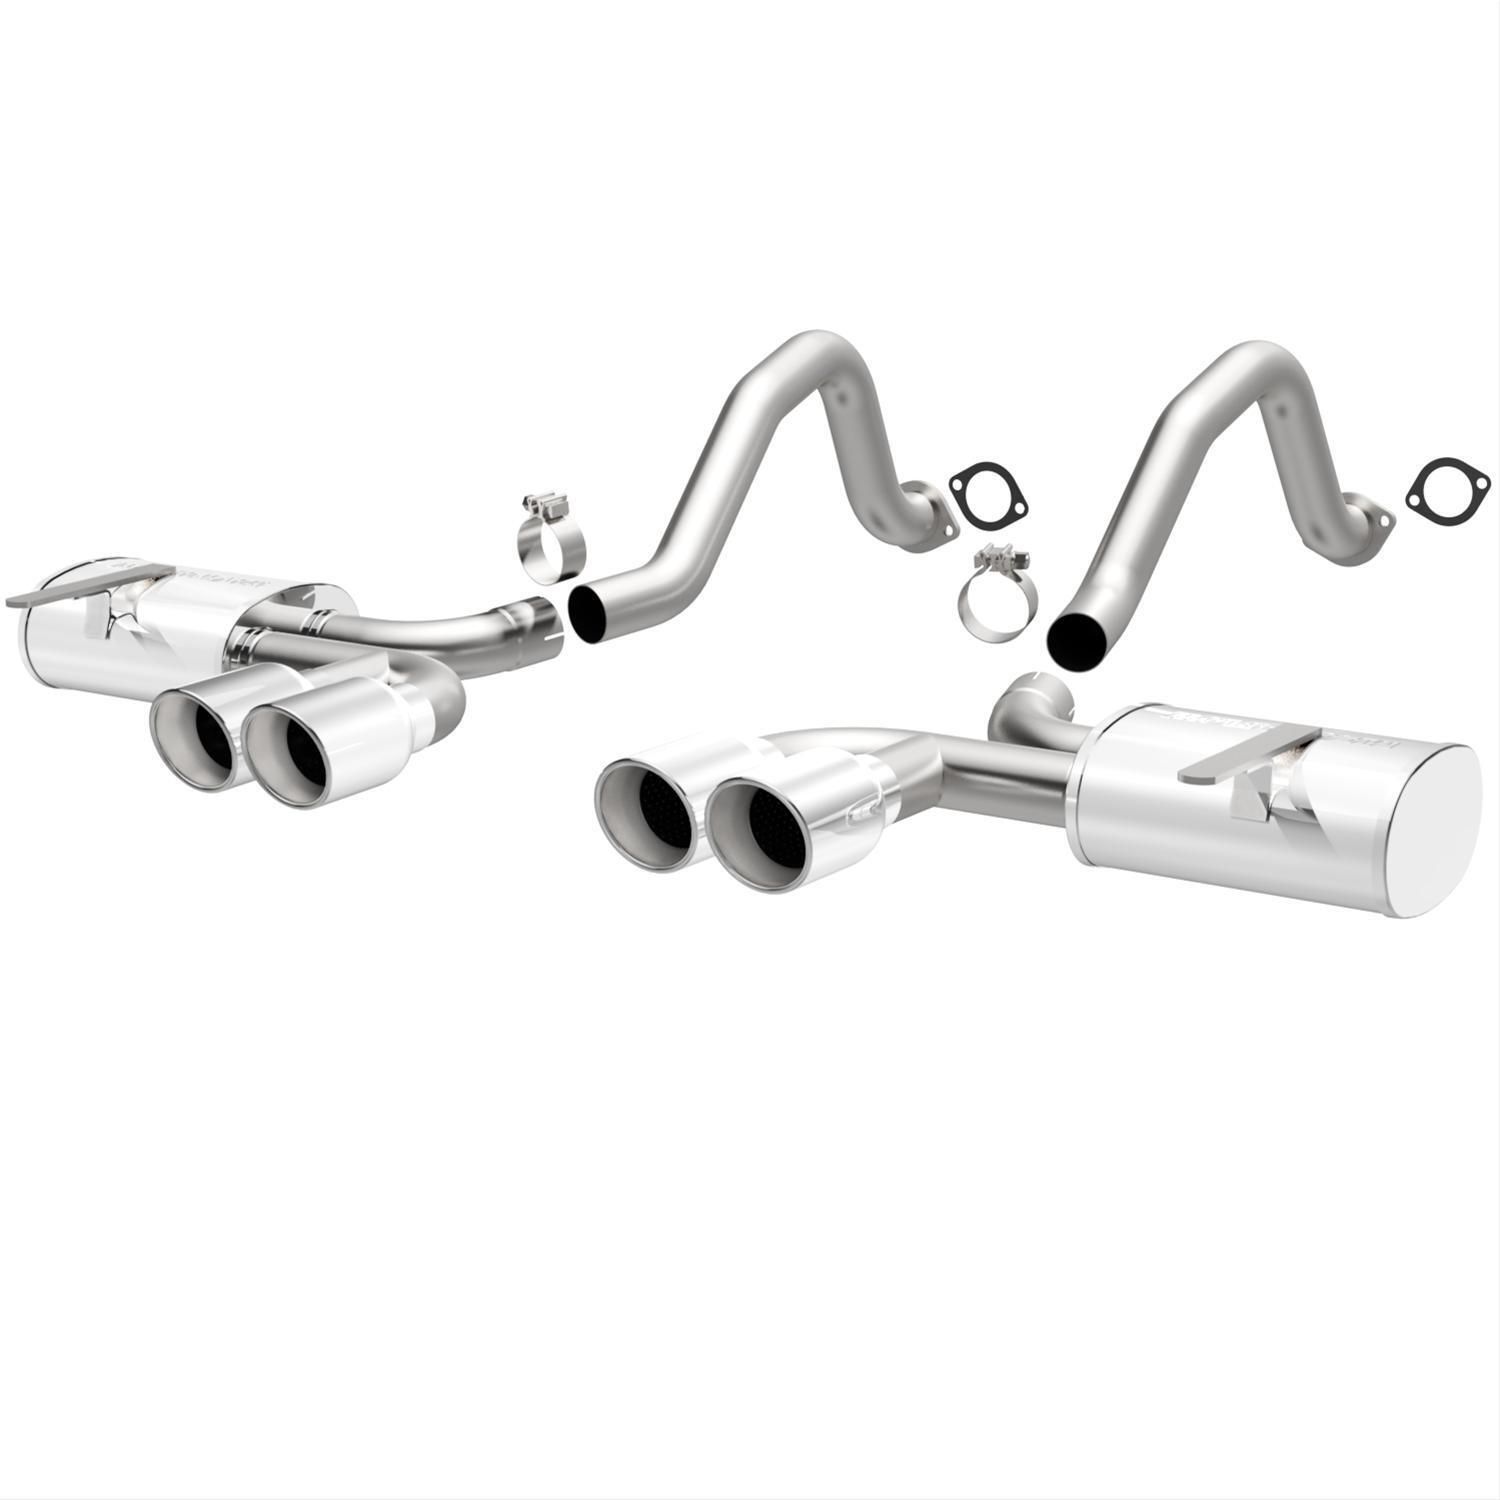 MAGNAFLOW 1997-2004 CHEVROLET CHEVY CORVETTE 5.7L V8 STAINLESS EXHAUST SYSTEM